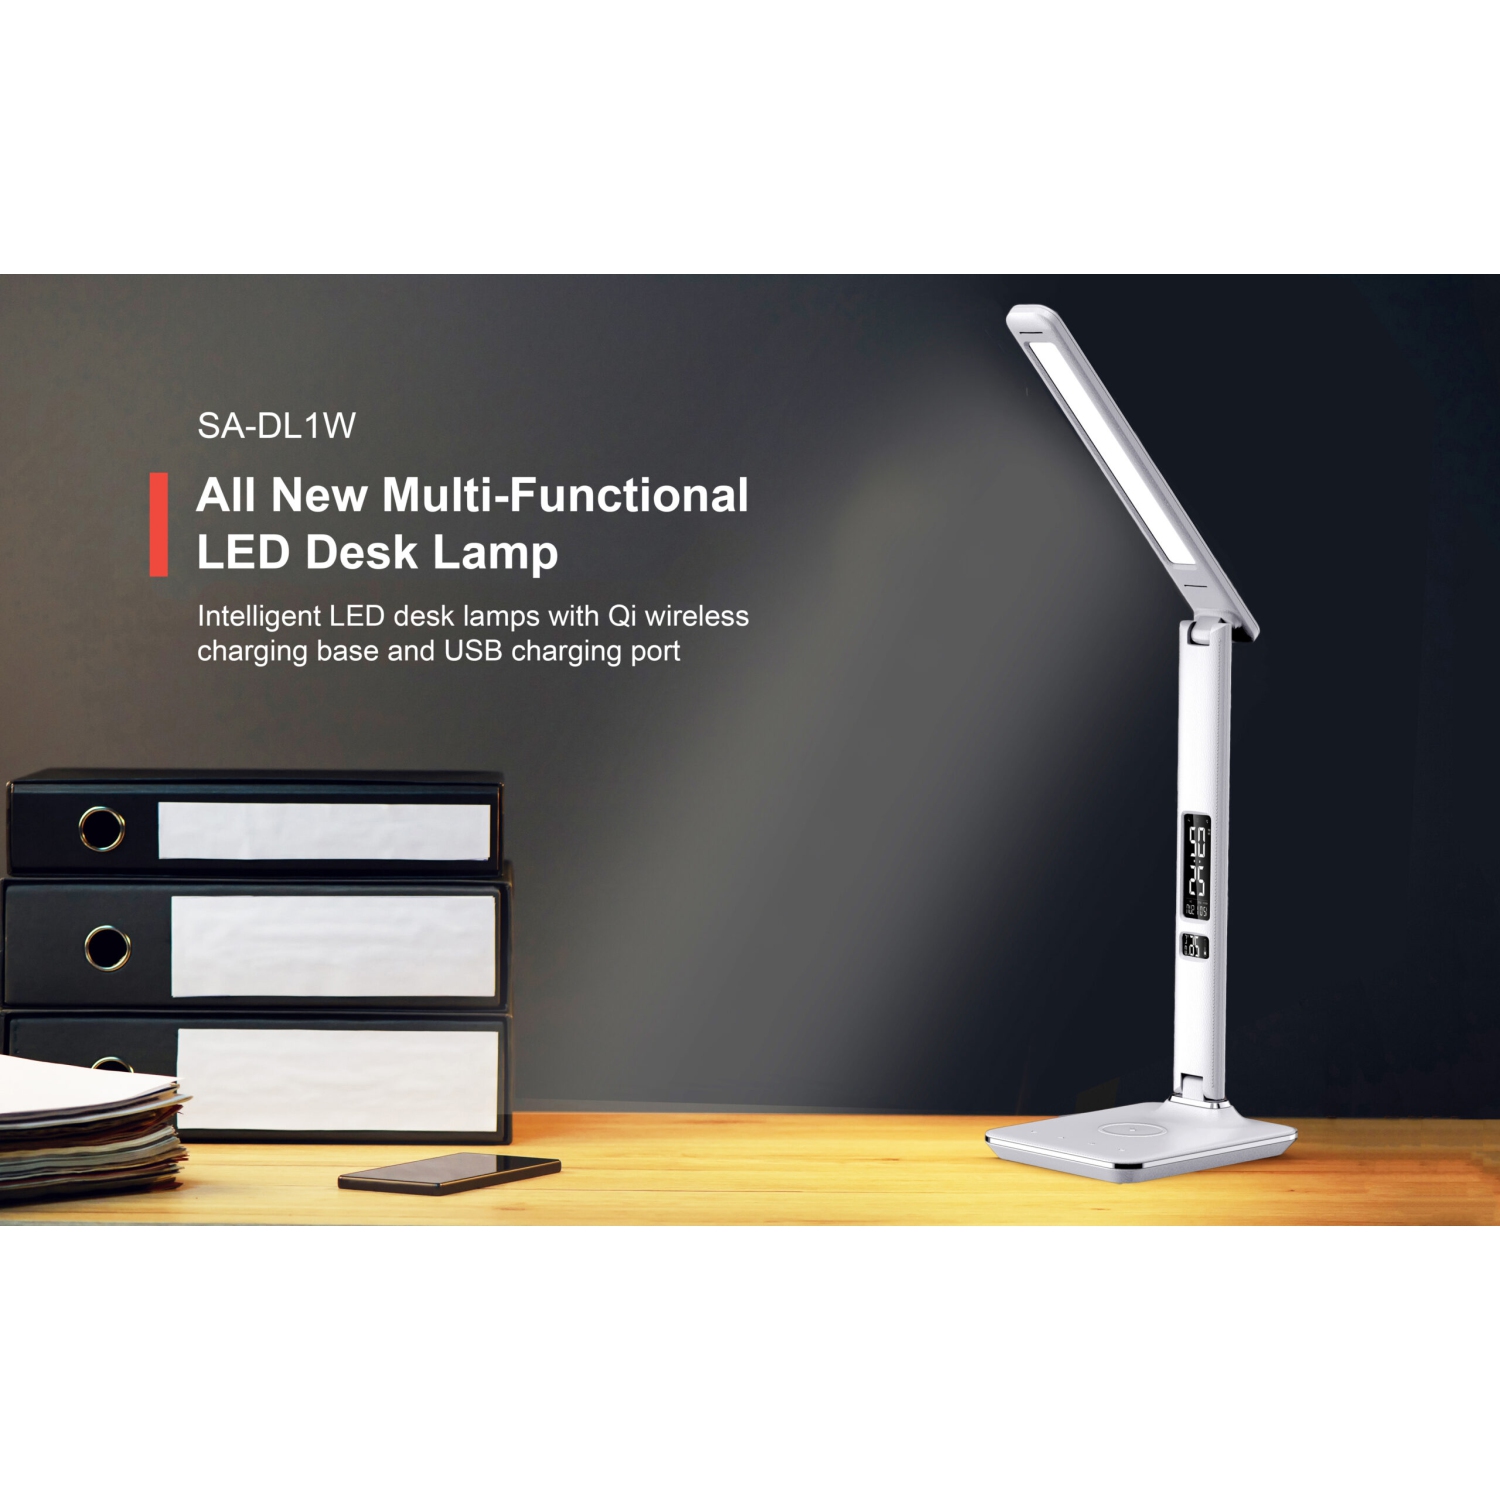 SHOPPINGALL LED Desk Lamp with Qi Wireless Charger, USB Charging